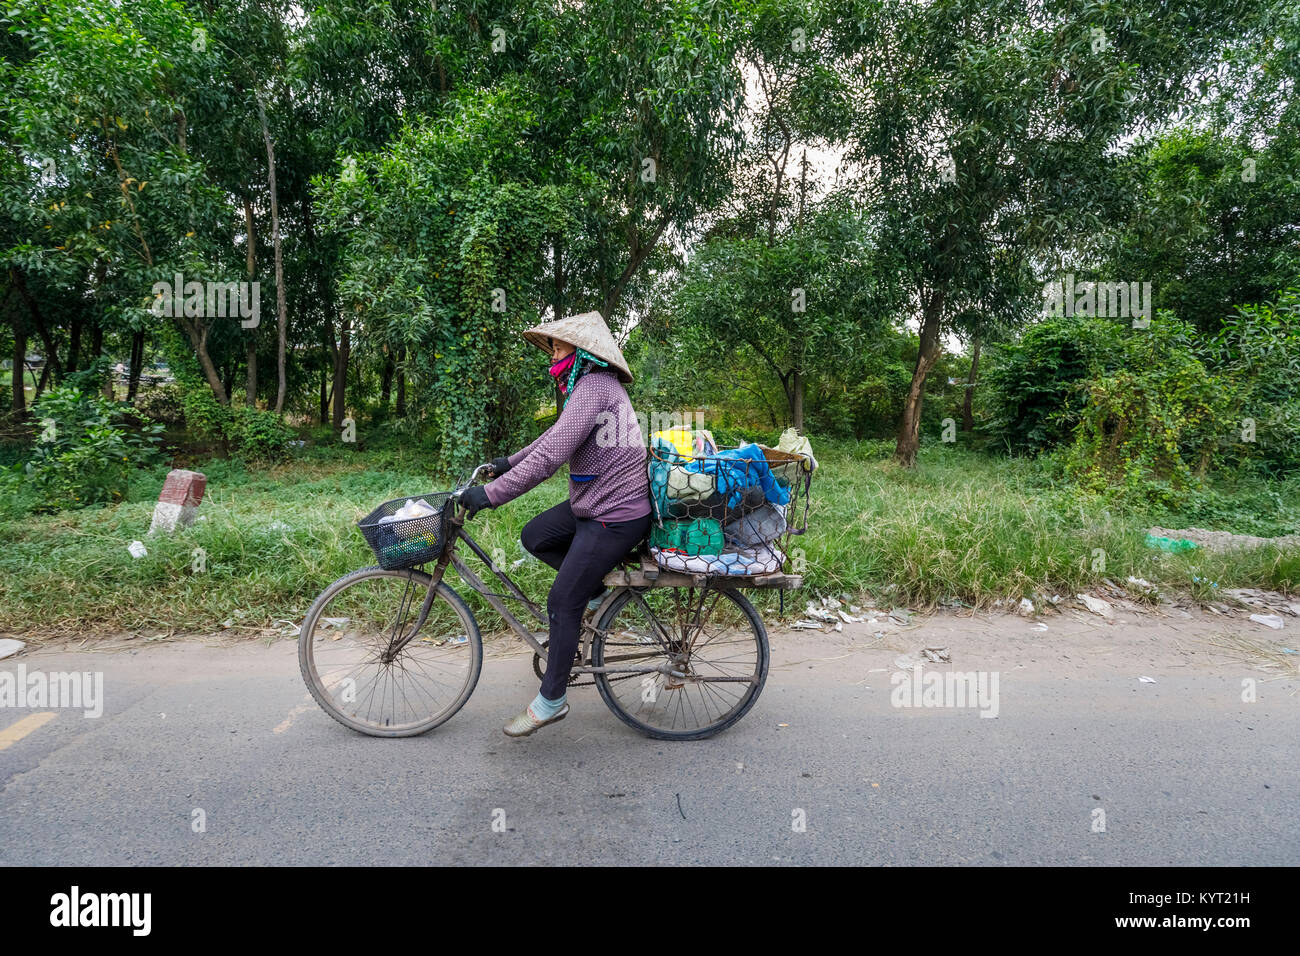 Street view in rural Saigon (Ho Chi Minh City), south Vietnam: local Vietnamese woman wearing a conical hat riding an old fashioned woman's bicycle Stock Photo